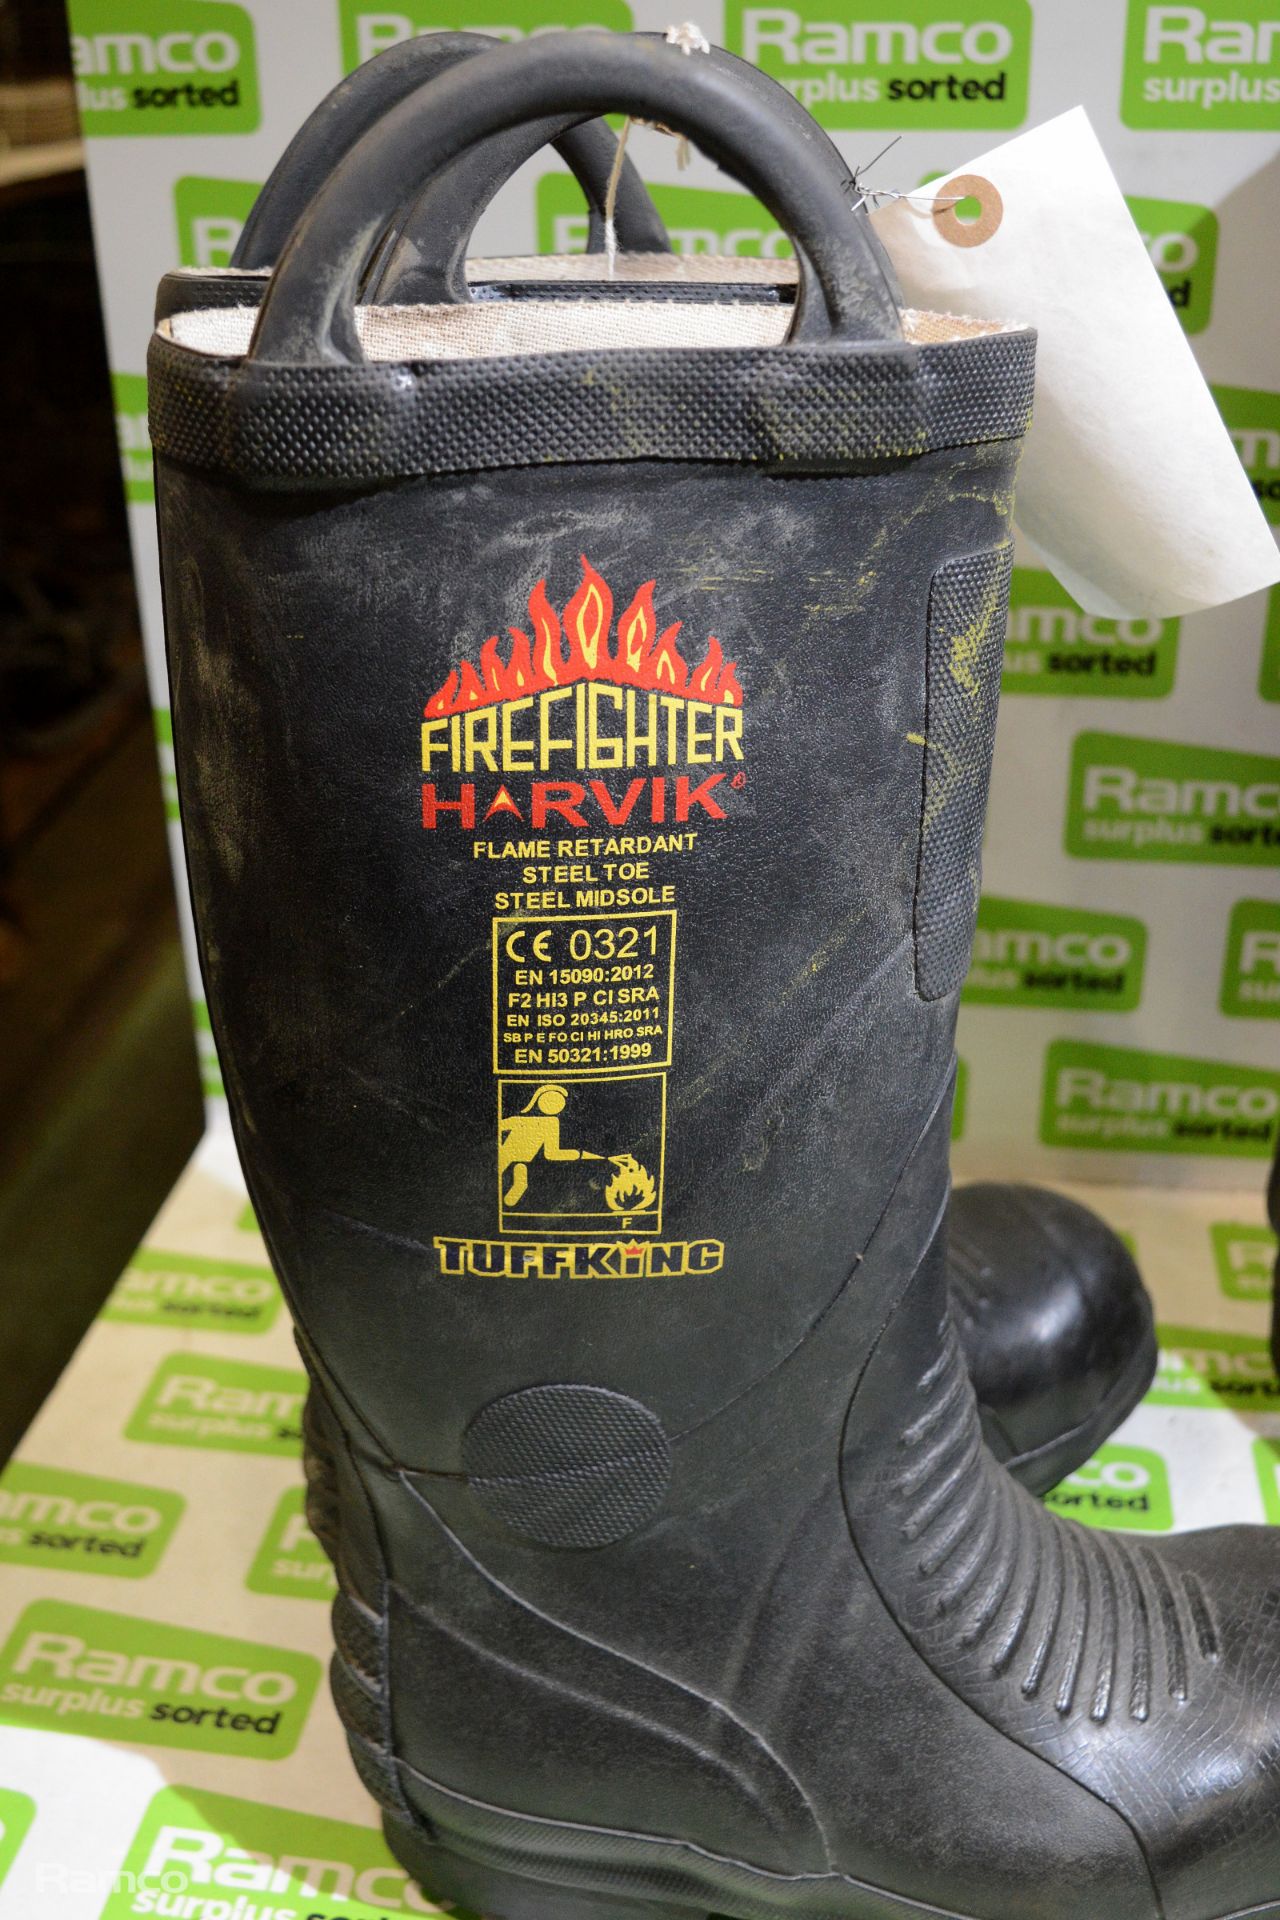 Tuffking 9684 Rubber Boots Pair - Size: EU 37, UK 4 - 25x30x40cm, Firefighter 4000 Rubber Wellington - Image 2 of 4